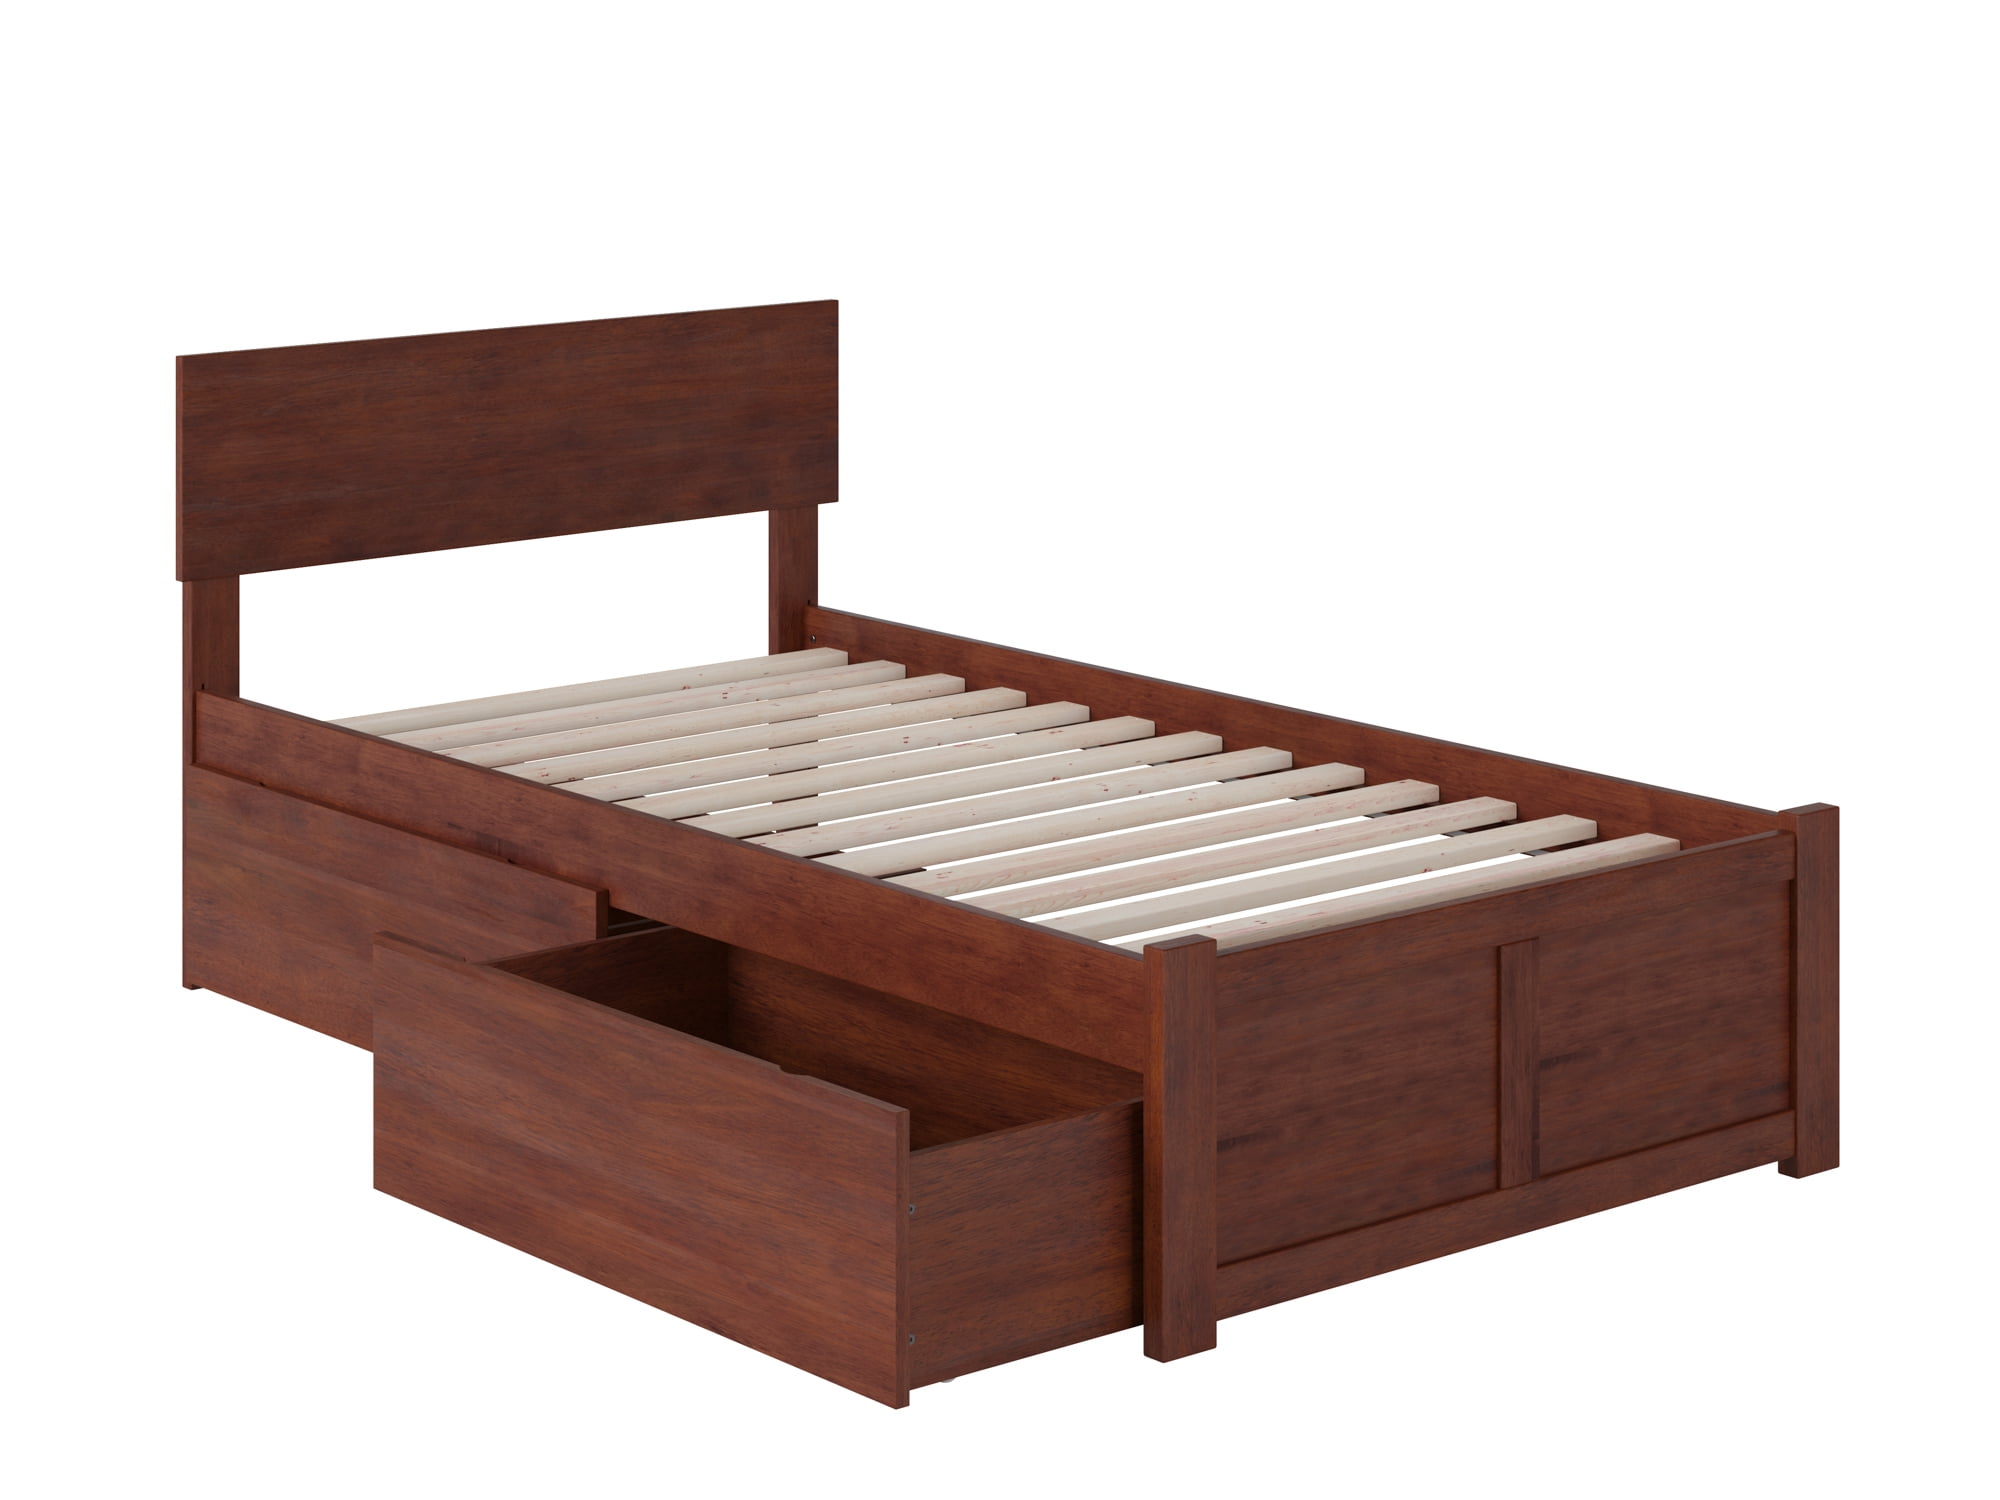 Ar8112114 Orlando Flat Panel Foot Board With Urban Bed Drawers, Antique Walnut - Twin Extra Large